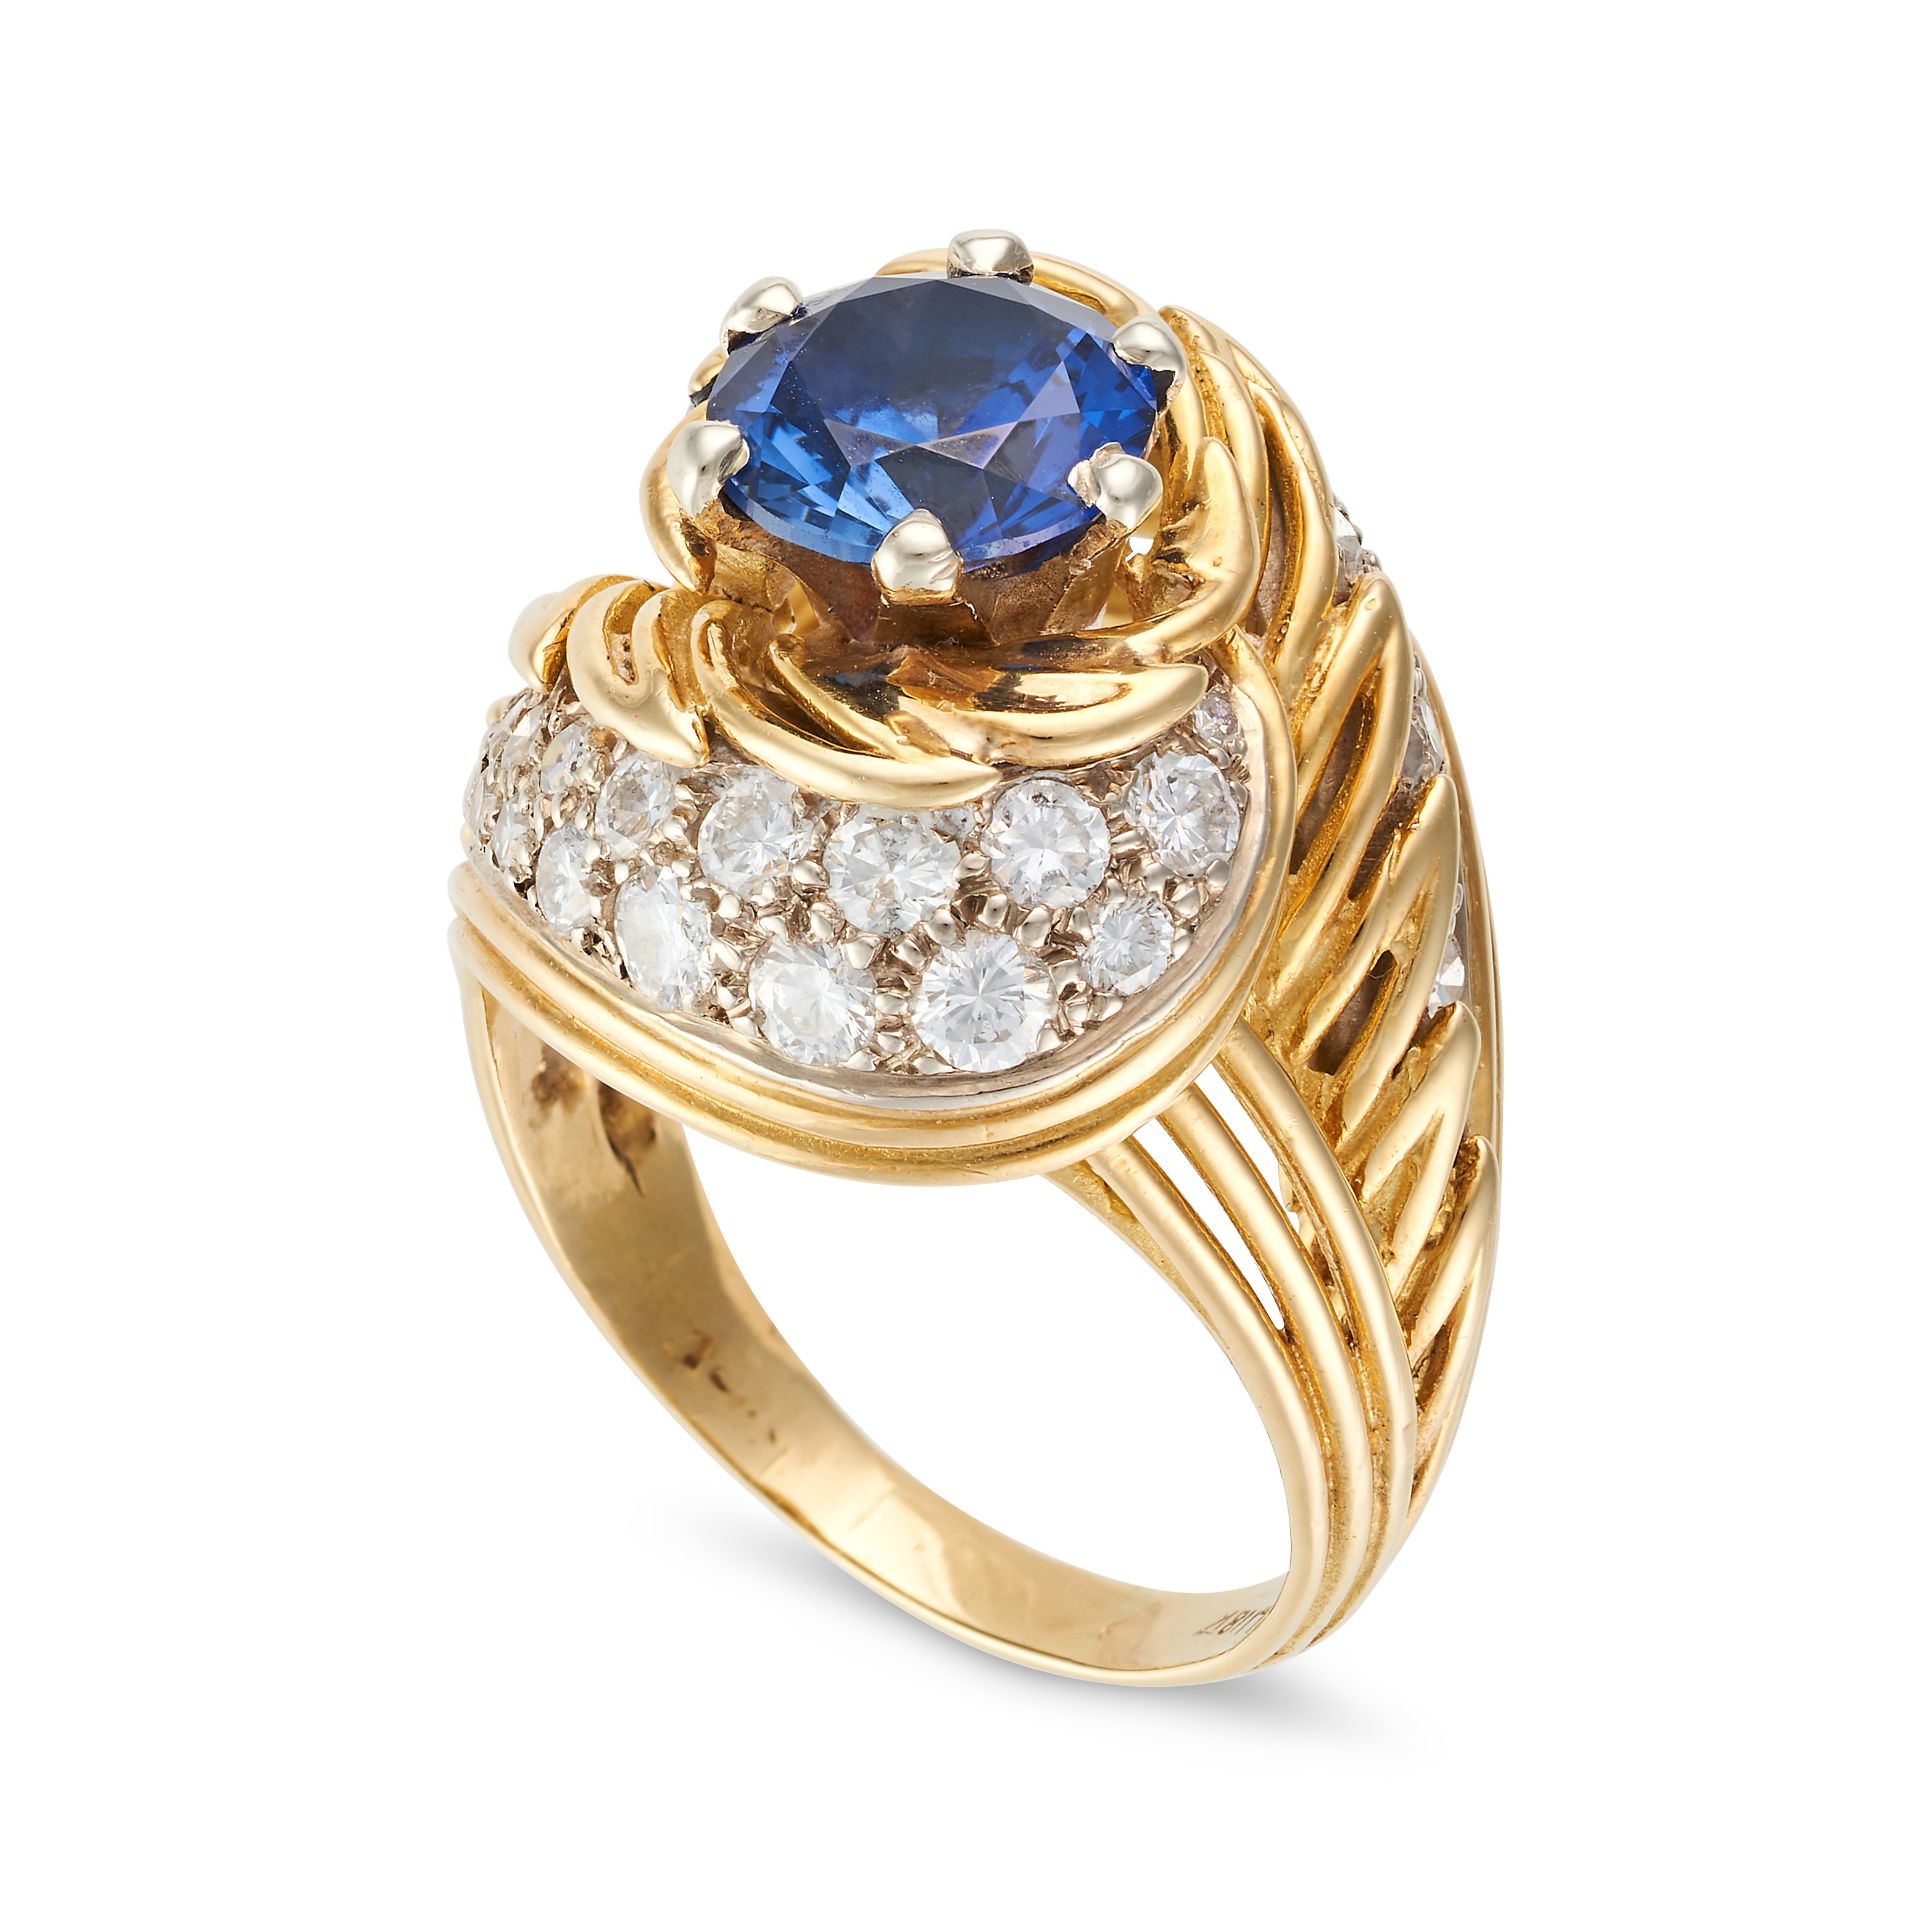 A SAPPHIRE AND DIAMOND DRESS RING set with a round cut sapphire of approximately 1.89 carats, acc... - Image 2 of 2